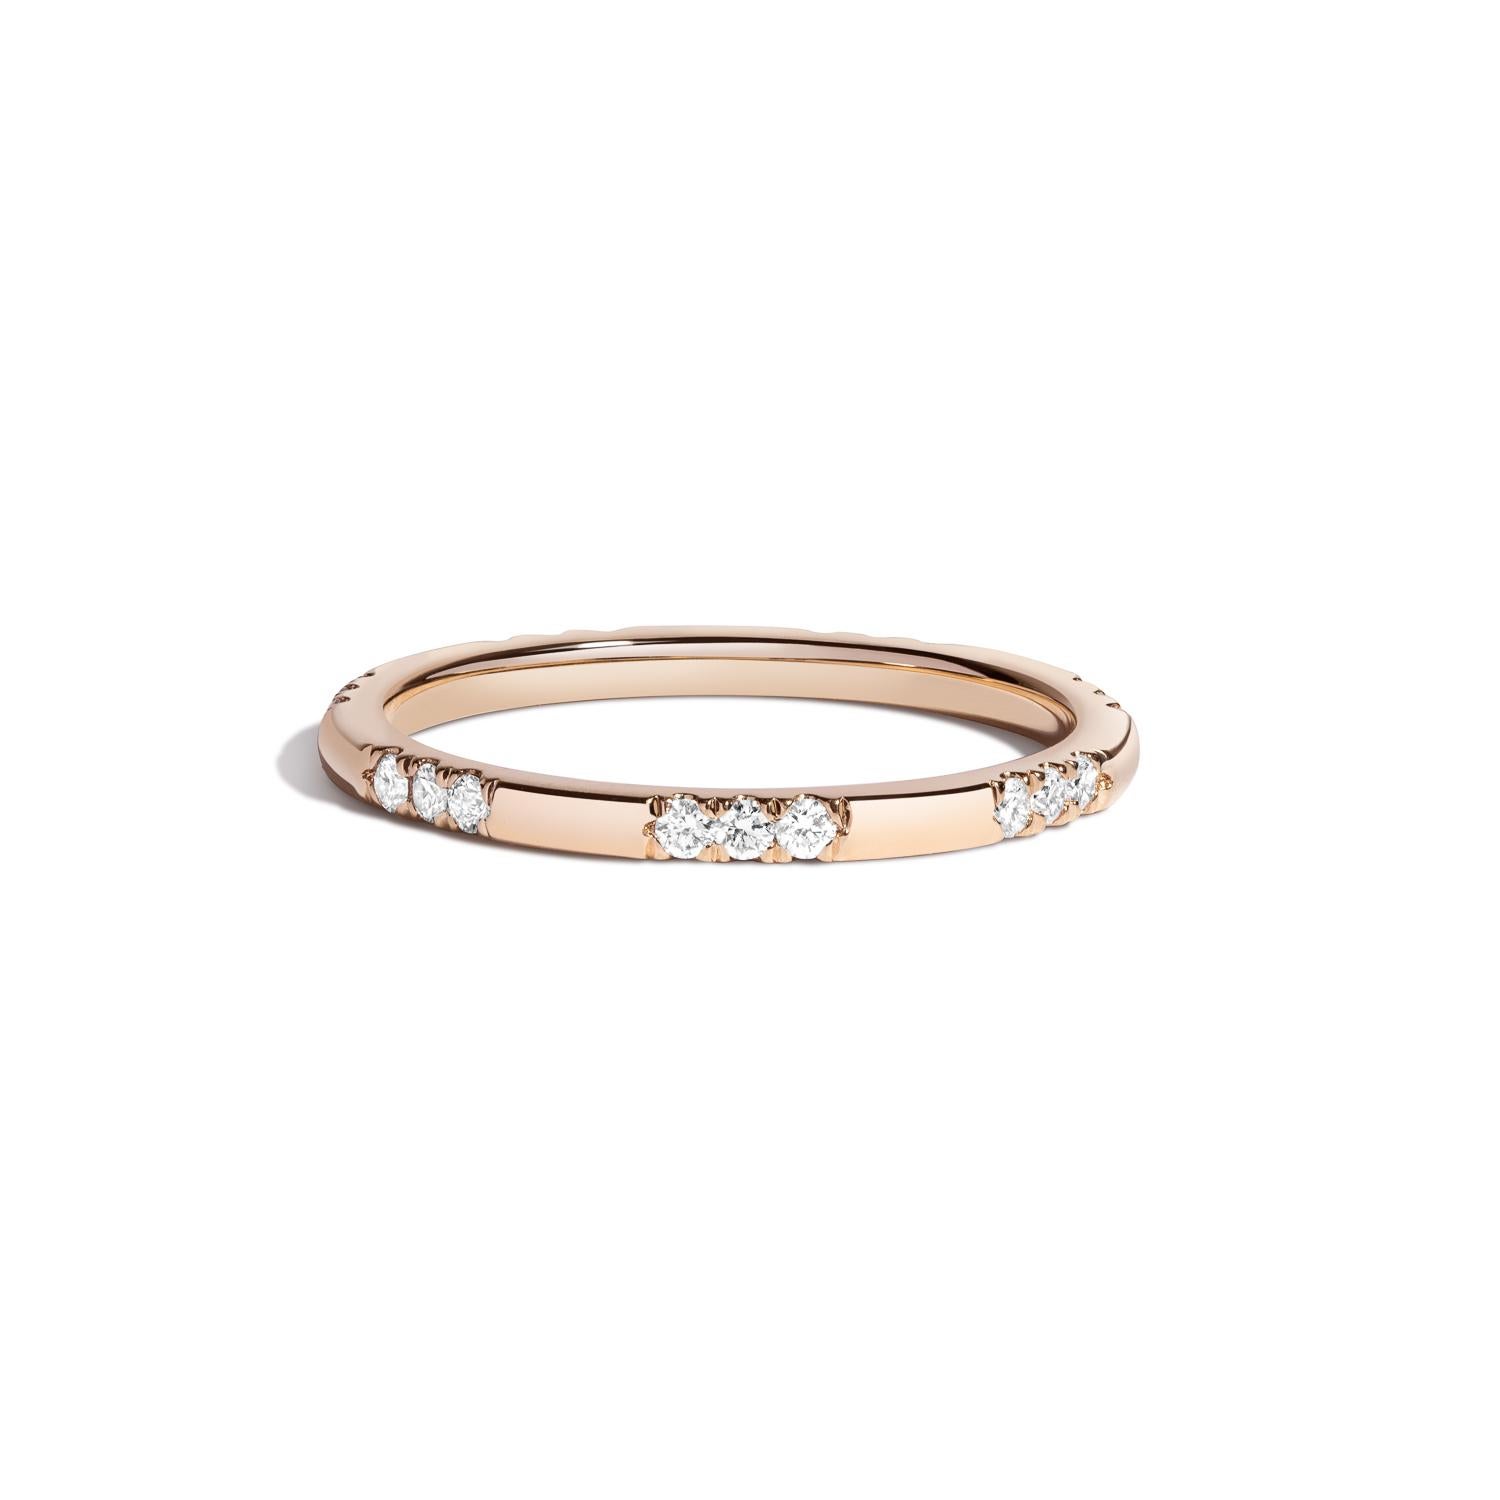 Gold and white diamonds don't compete for attention, they both take center stage in our Leonie Ring. An instant classic and most welcome addition to the collection! 

14k yellow gold
White diamond carat weight: 0.25c
1.65mm band width
Available in